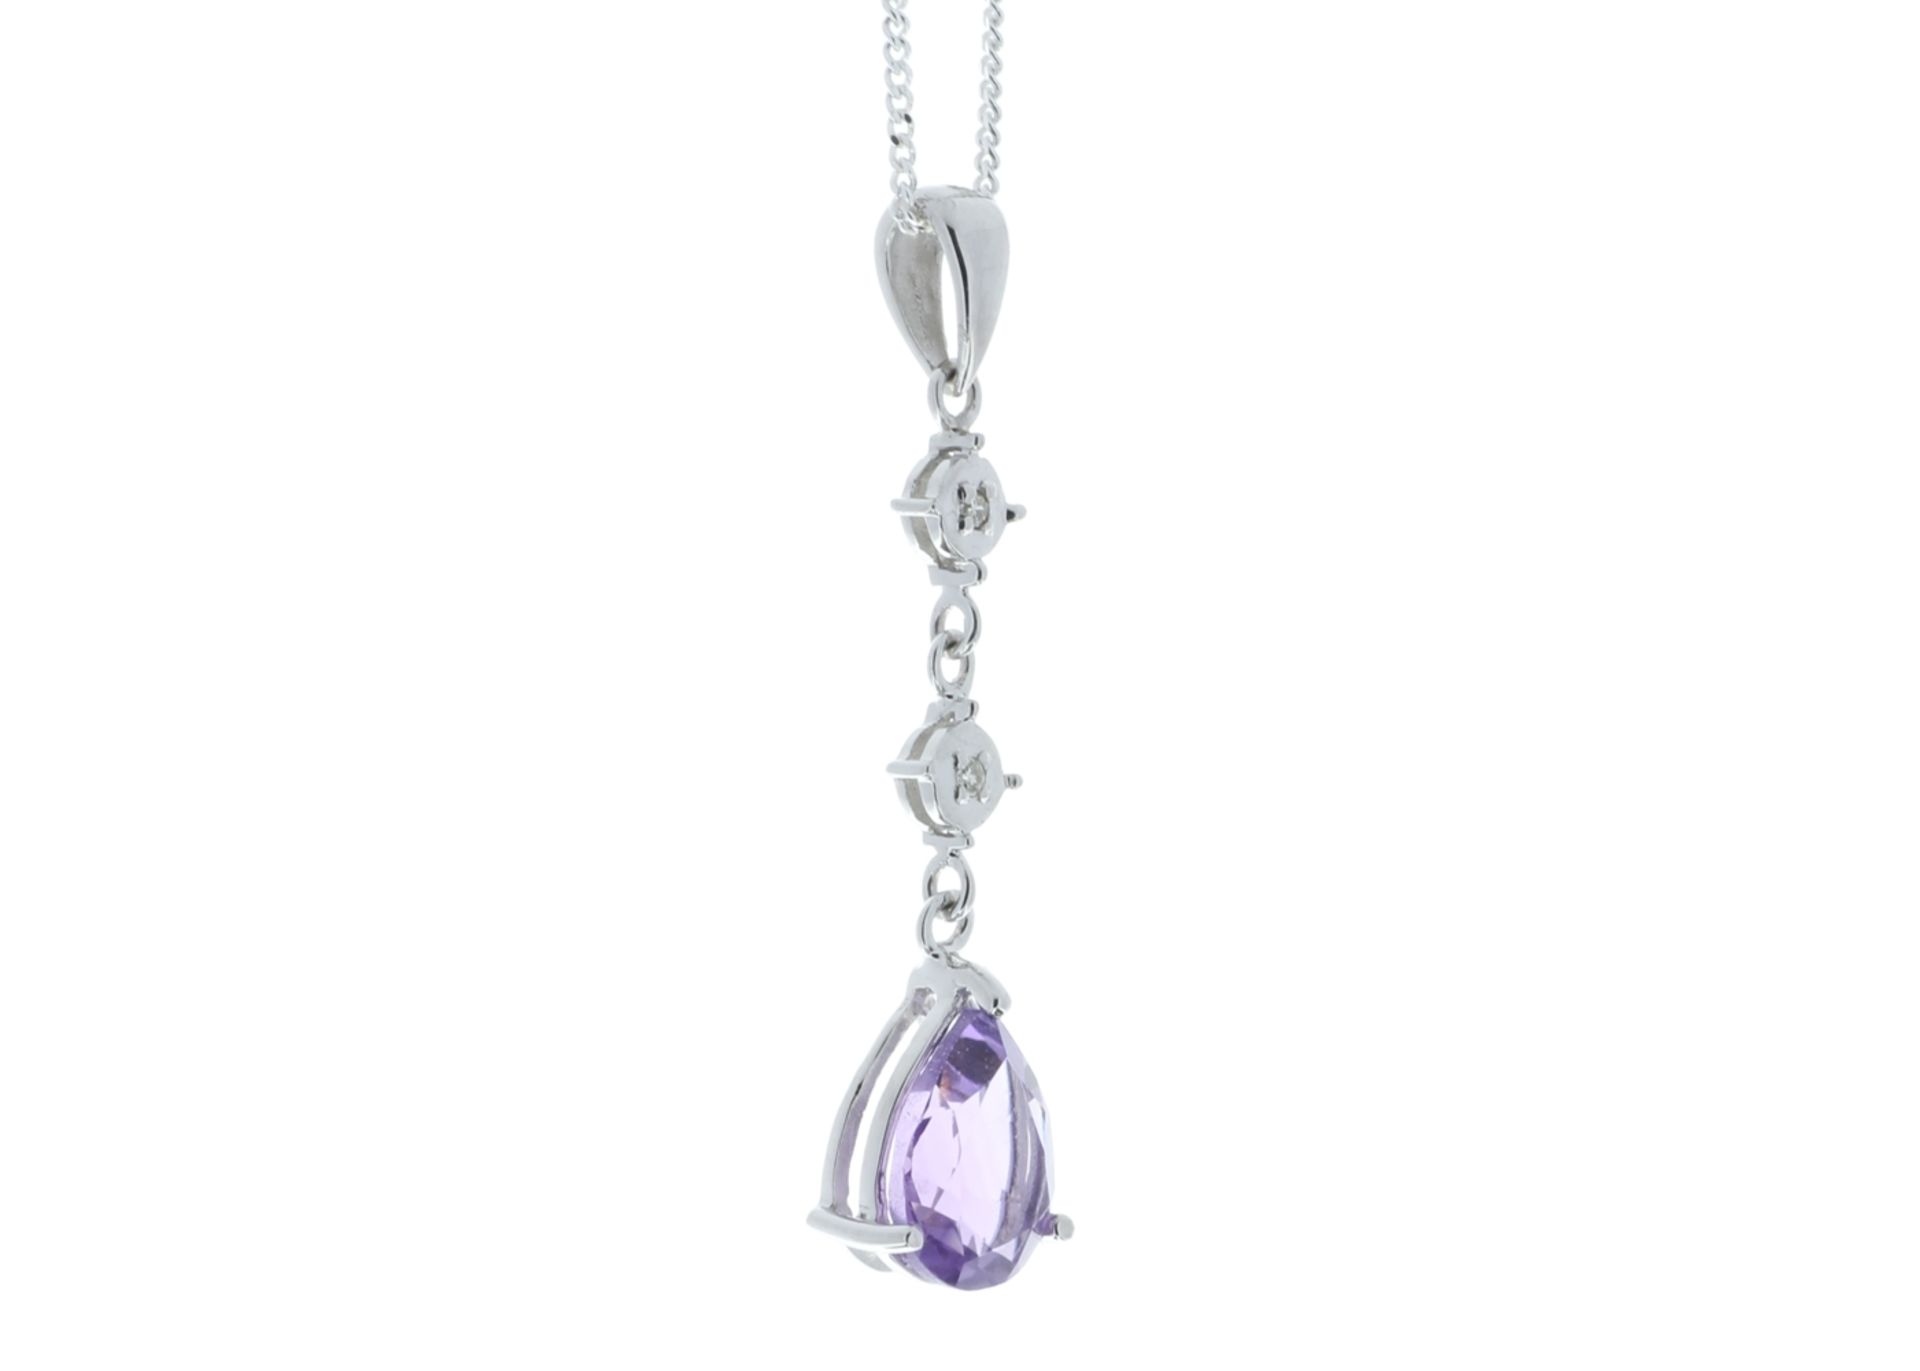 9ct White Gold Amethyst And Diamond Pendant - Valued By GIE £560.00 - This is classic pendant, - Image 2 of 5